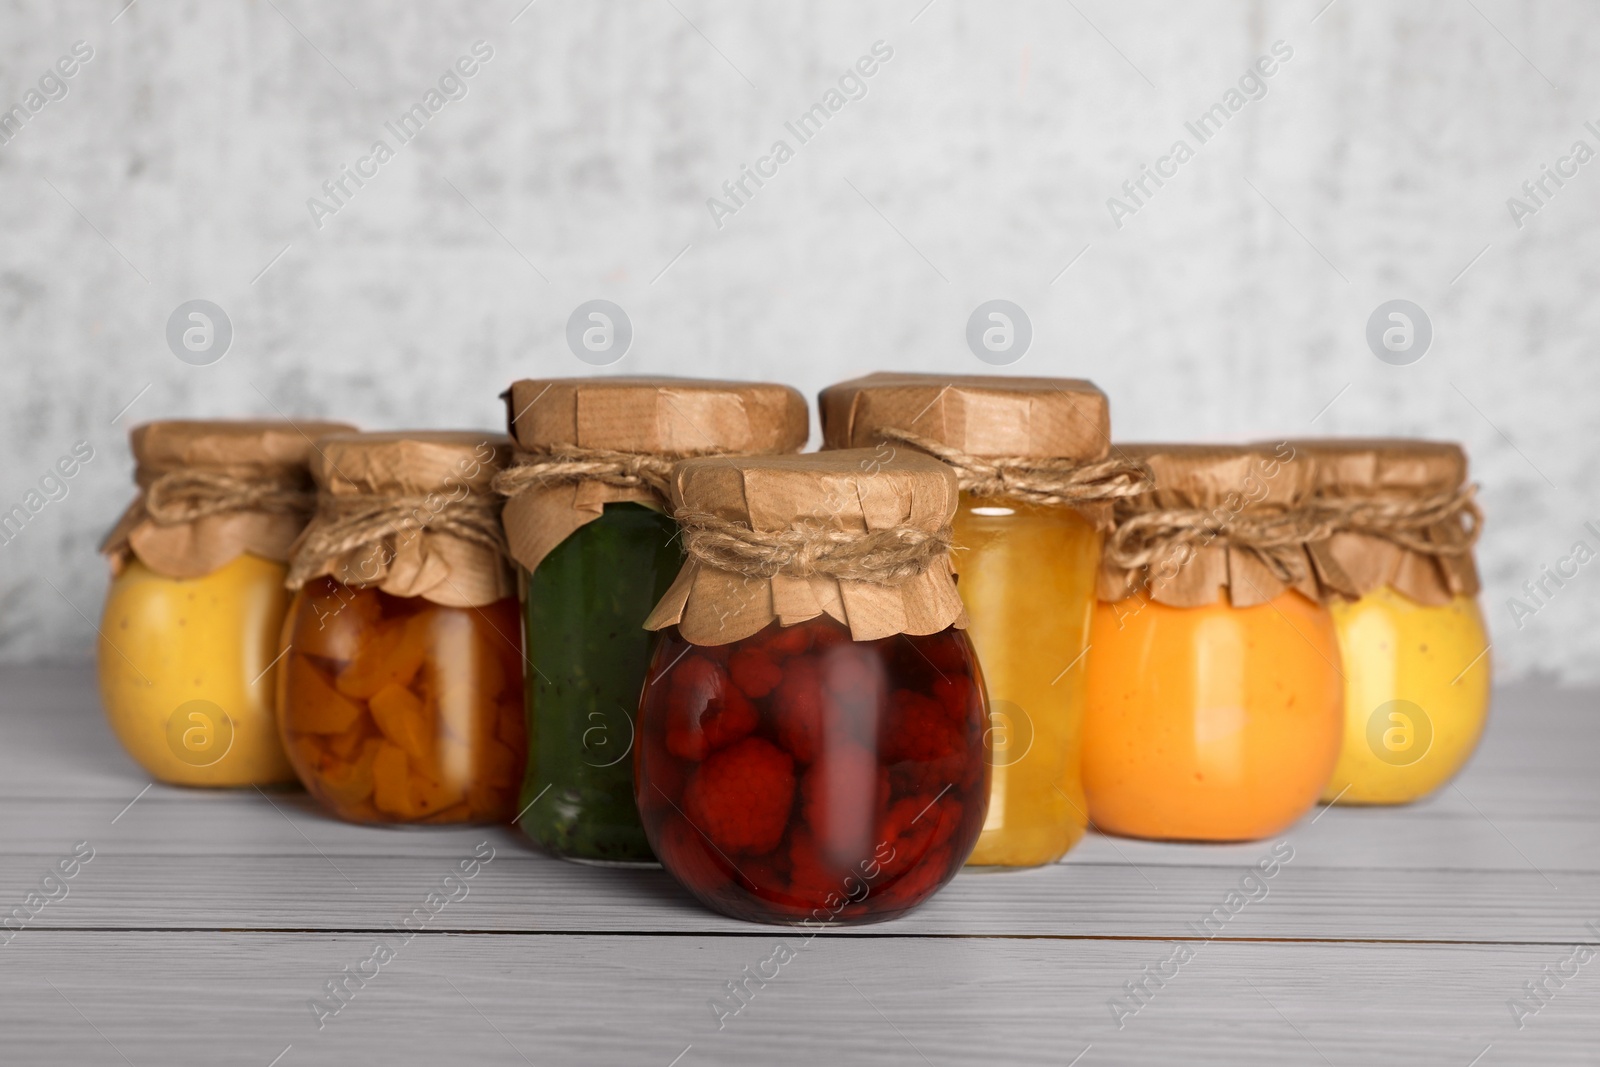 Photo of Jars with canned fruit jams on wooden table